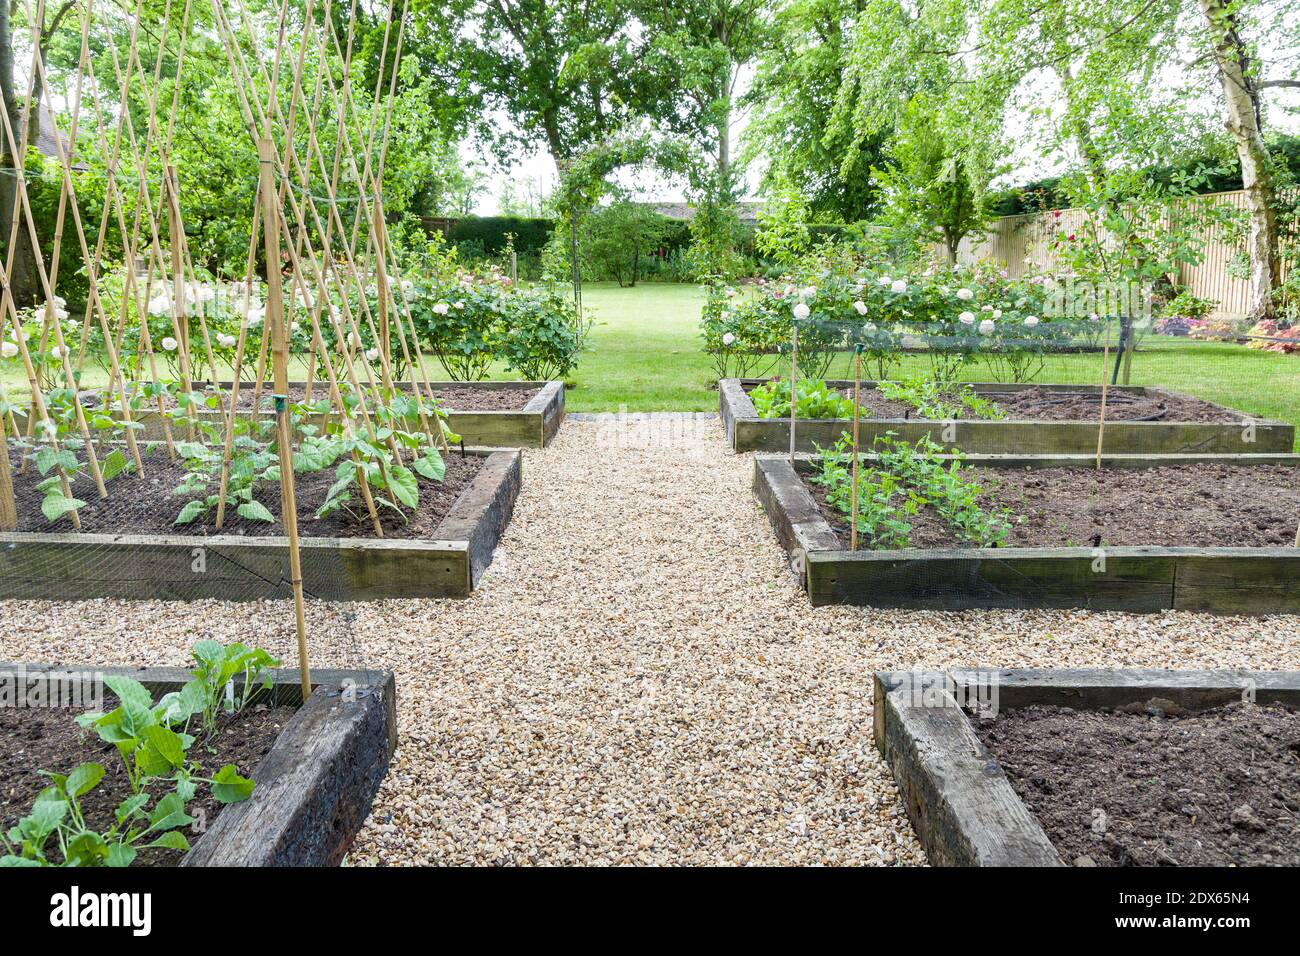 Gravel (shingle) path or paths in a vegetable patch with timber raised beds, in a large garden in England, UK Stock Photo